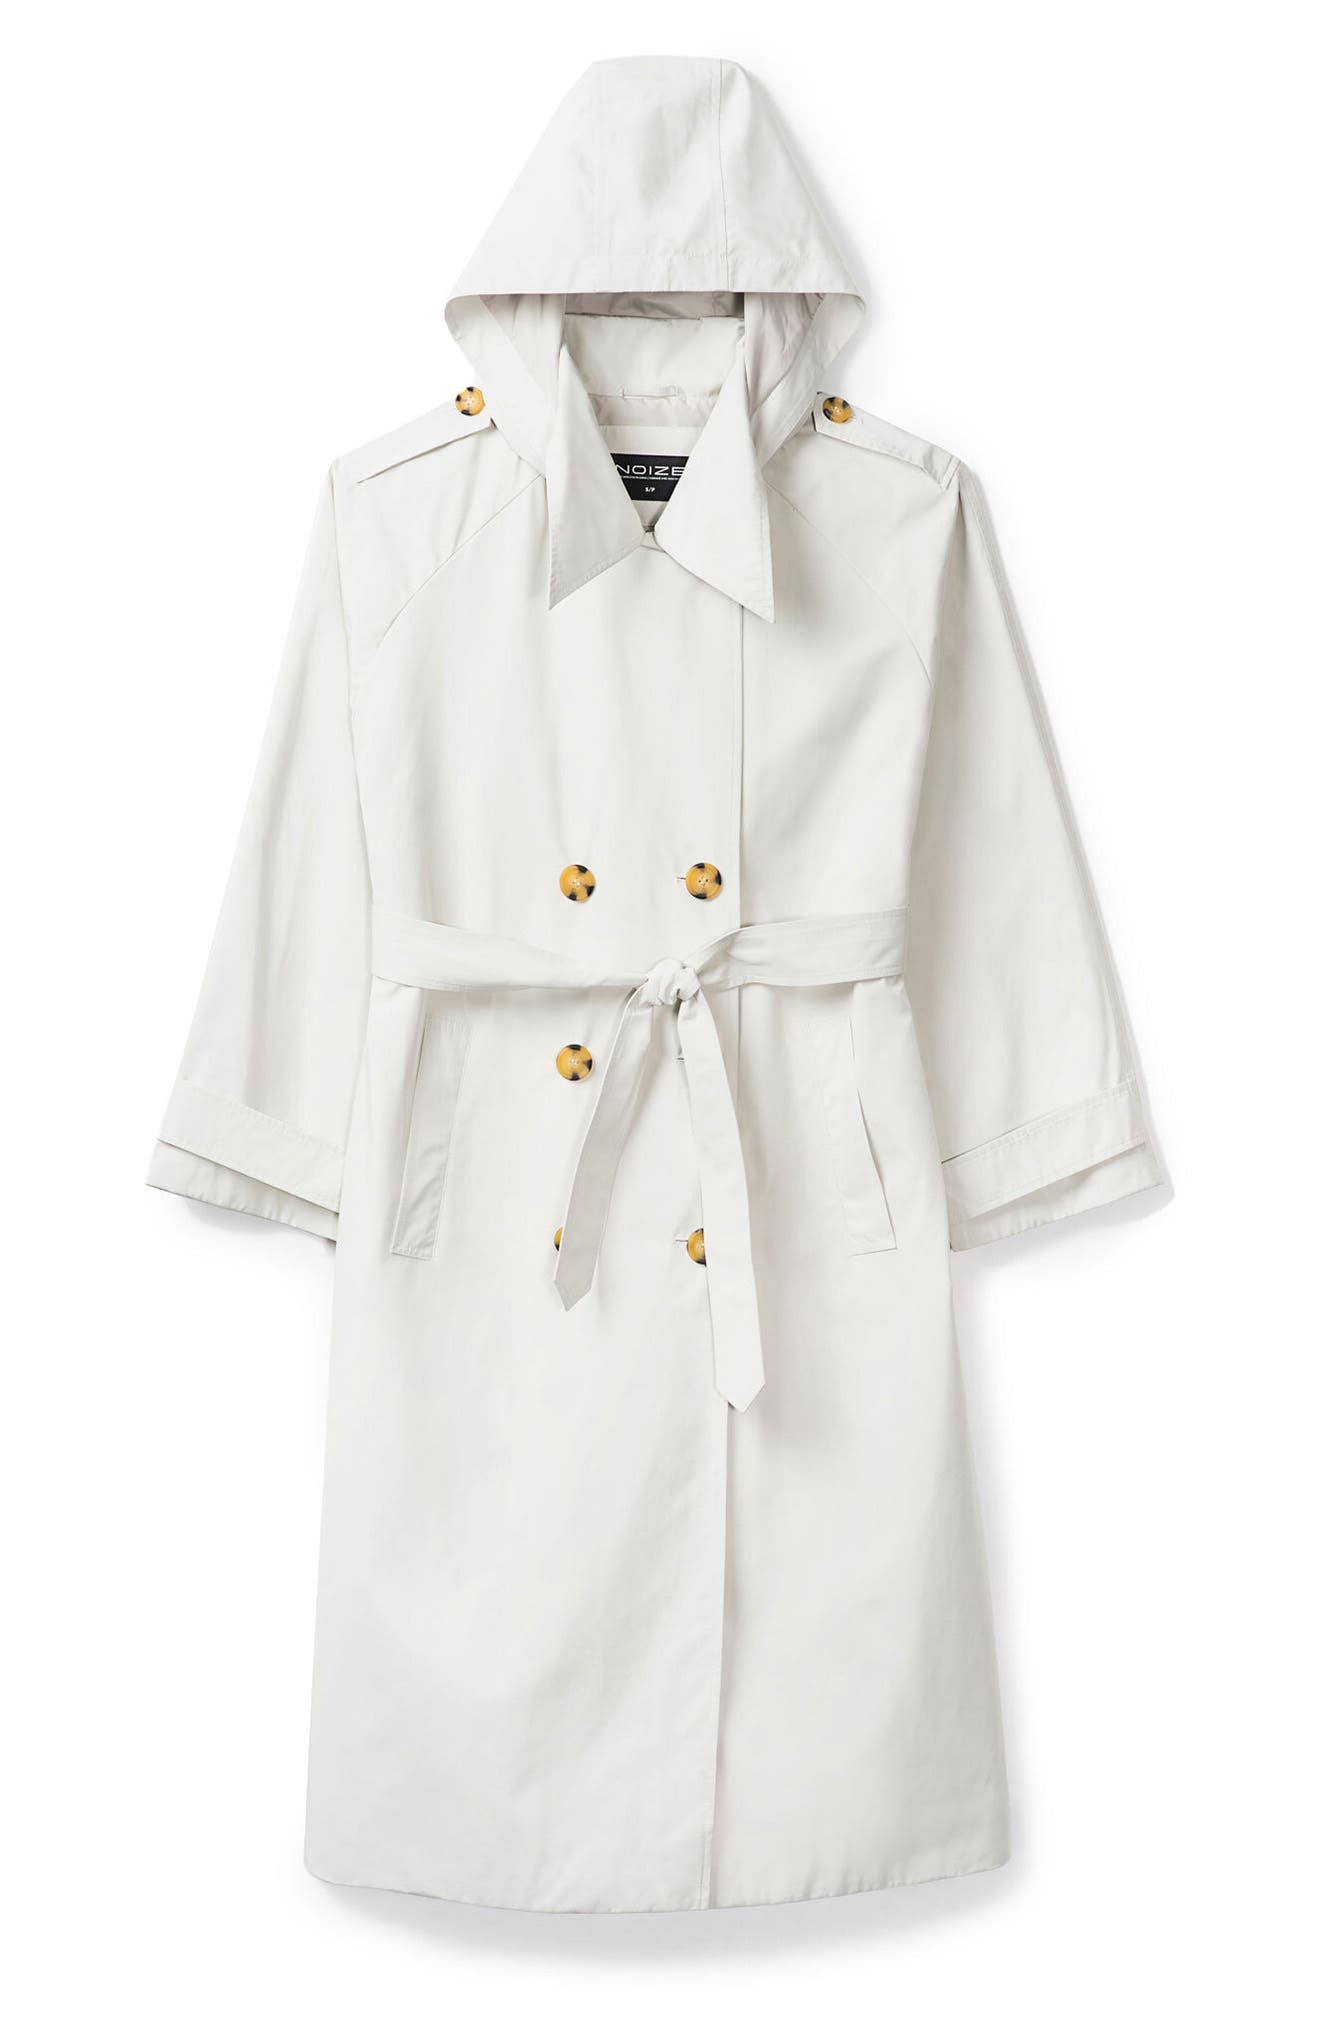 Noize Jaya Hooded Trench Coat in Oyster